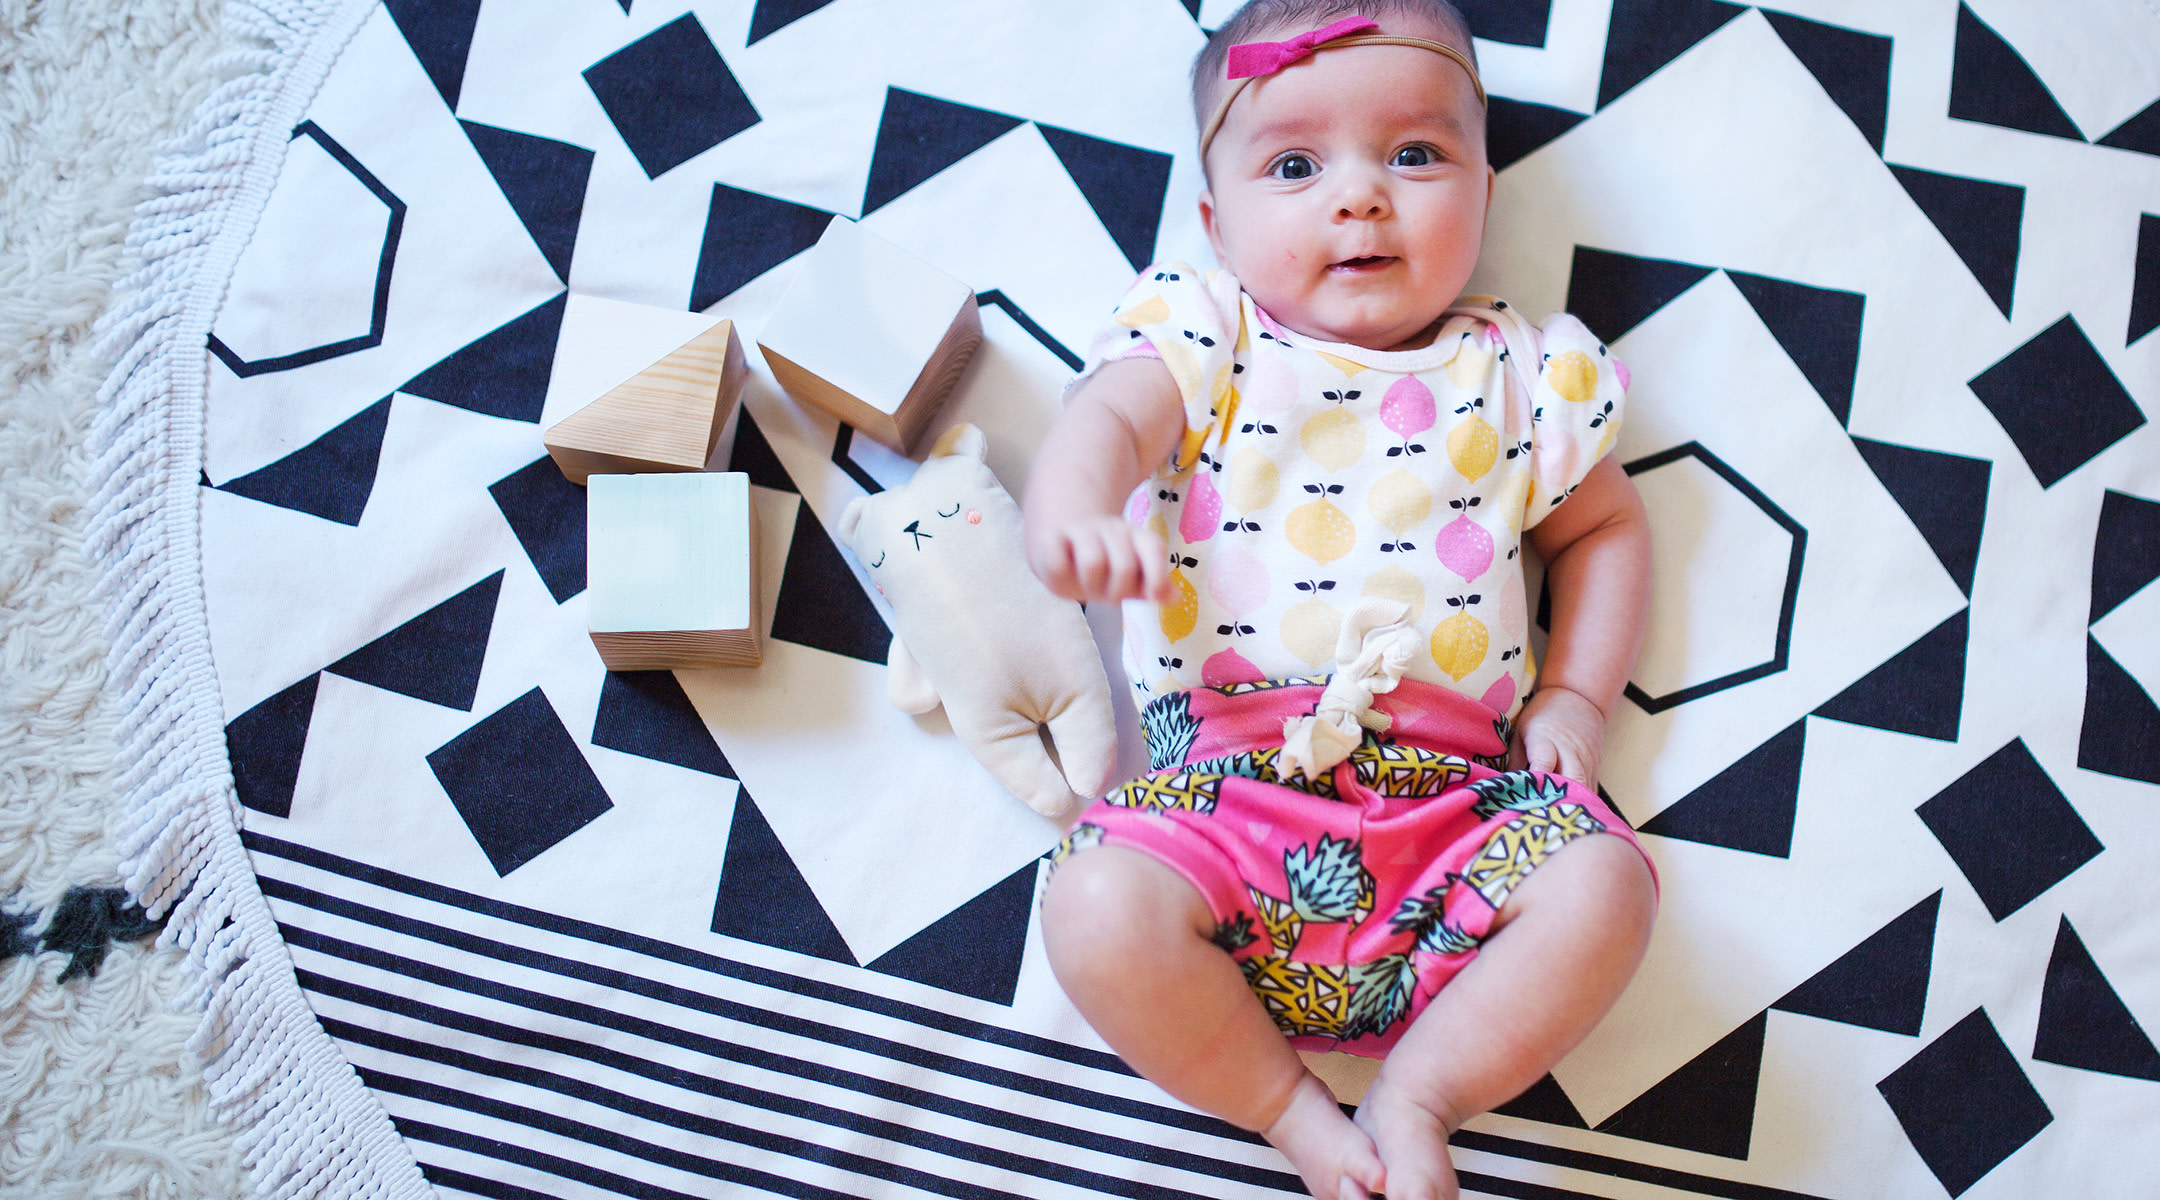 baby on rug surrounded by learning blocks